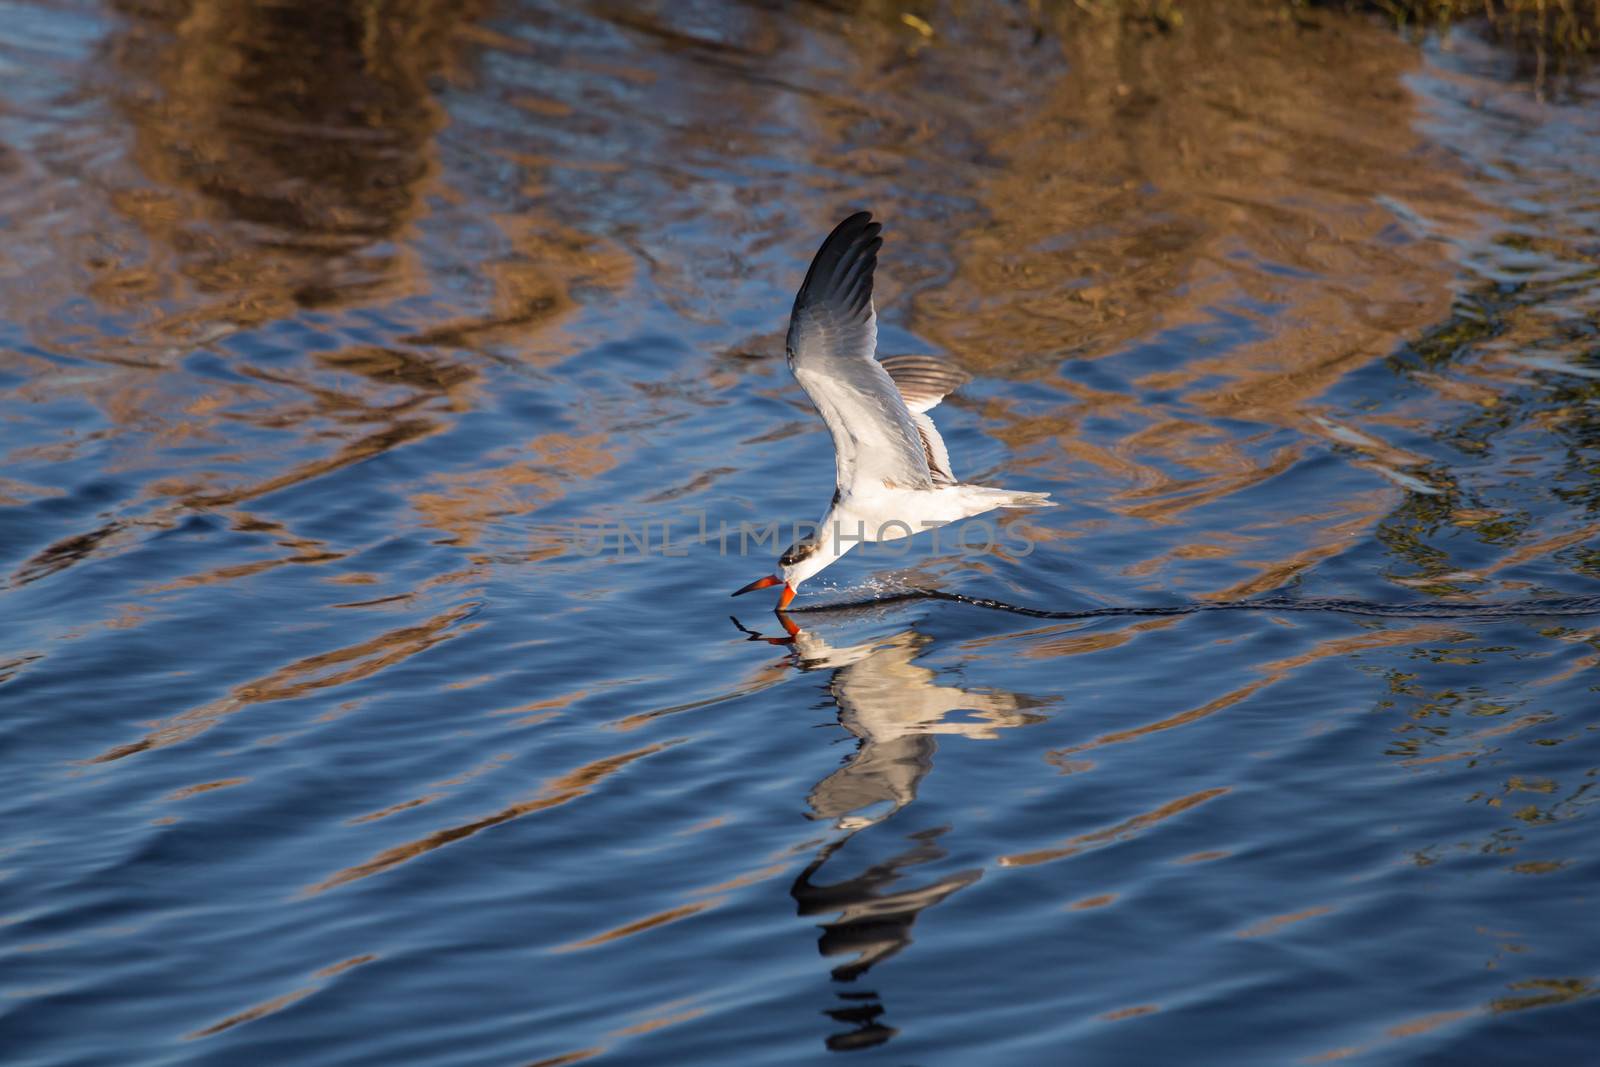 Black Skimmers look so graceful as they cut a line in the water in their search for fish.